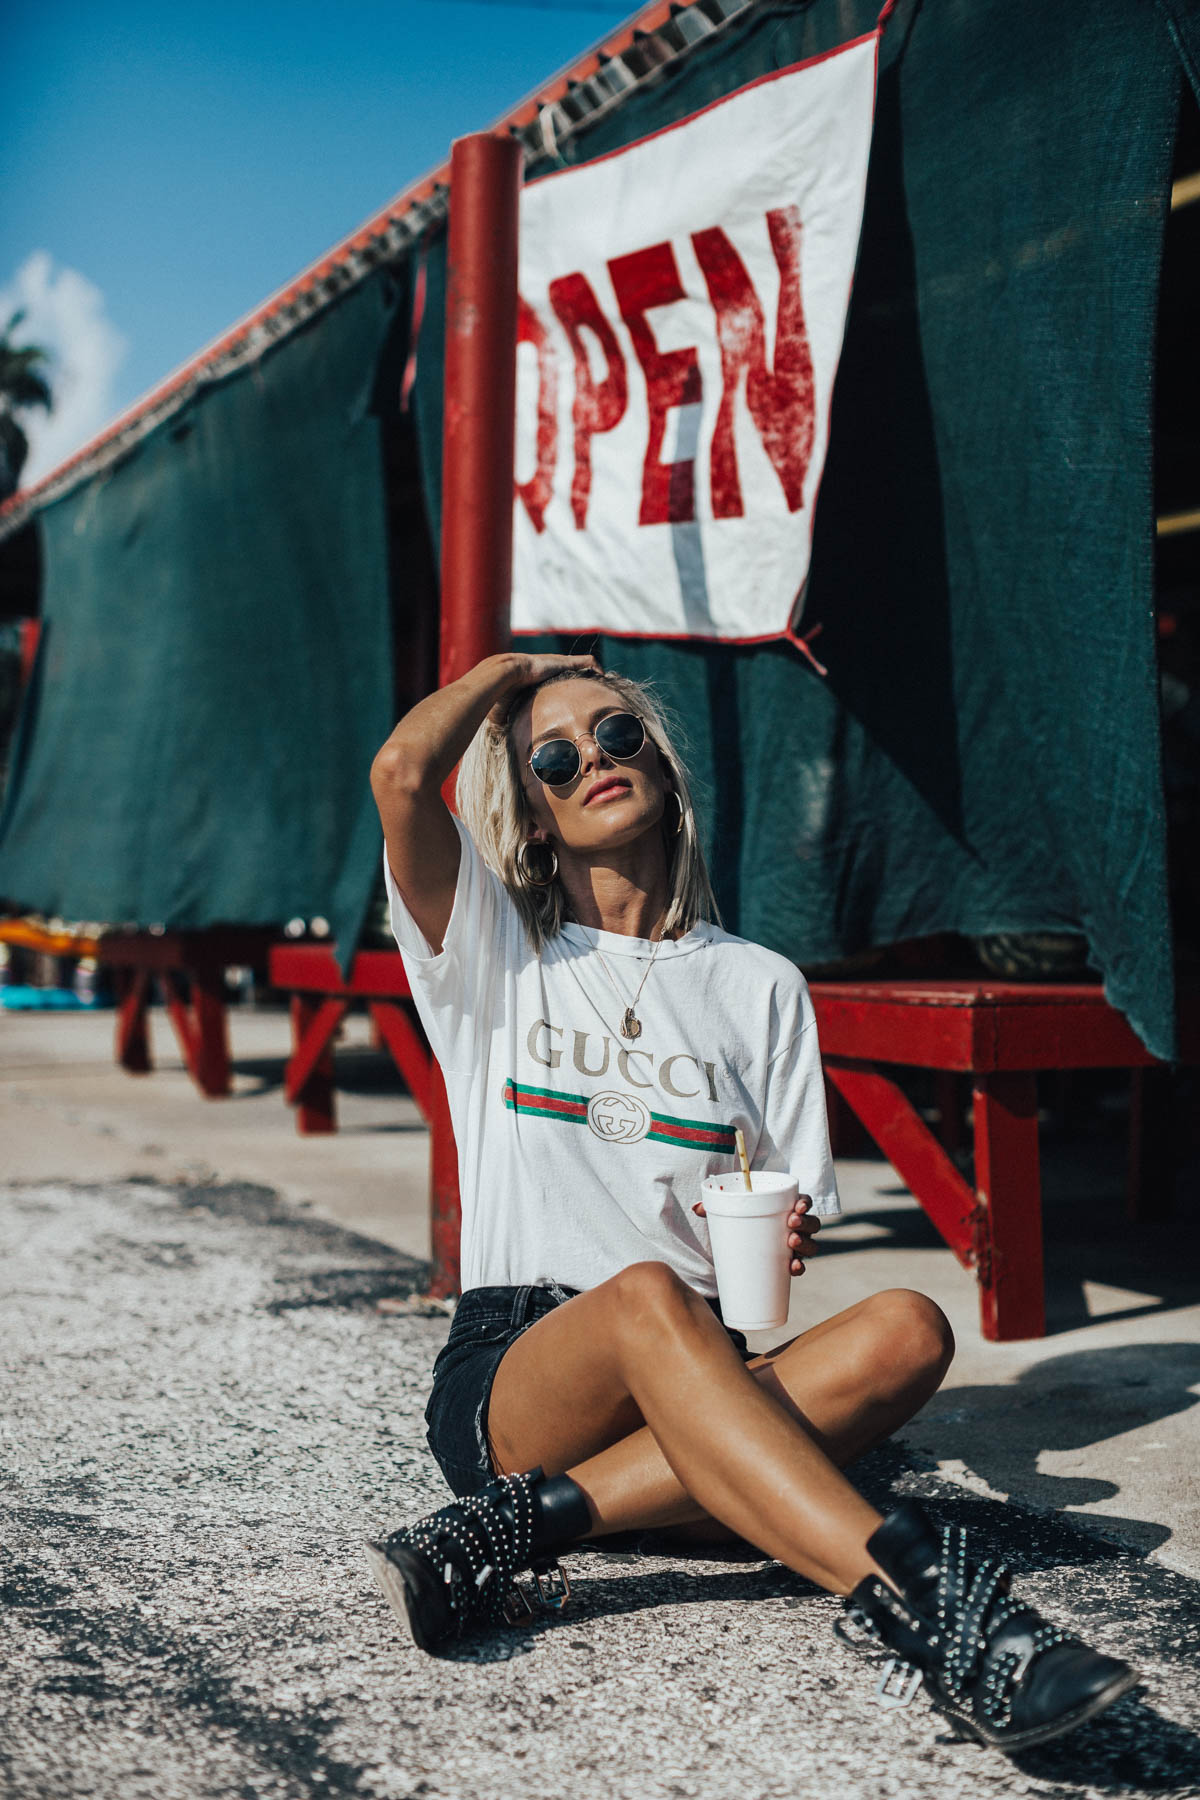 blogger Sage Coralli styling a 90's inspired look wearing the Gucci logo tee